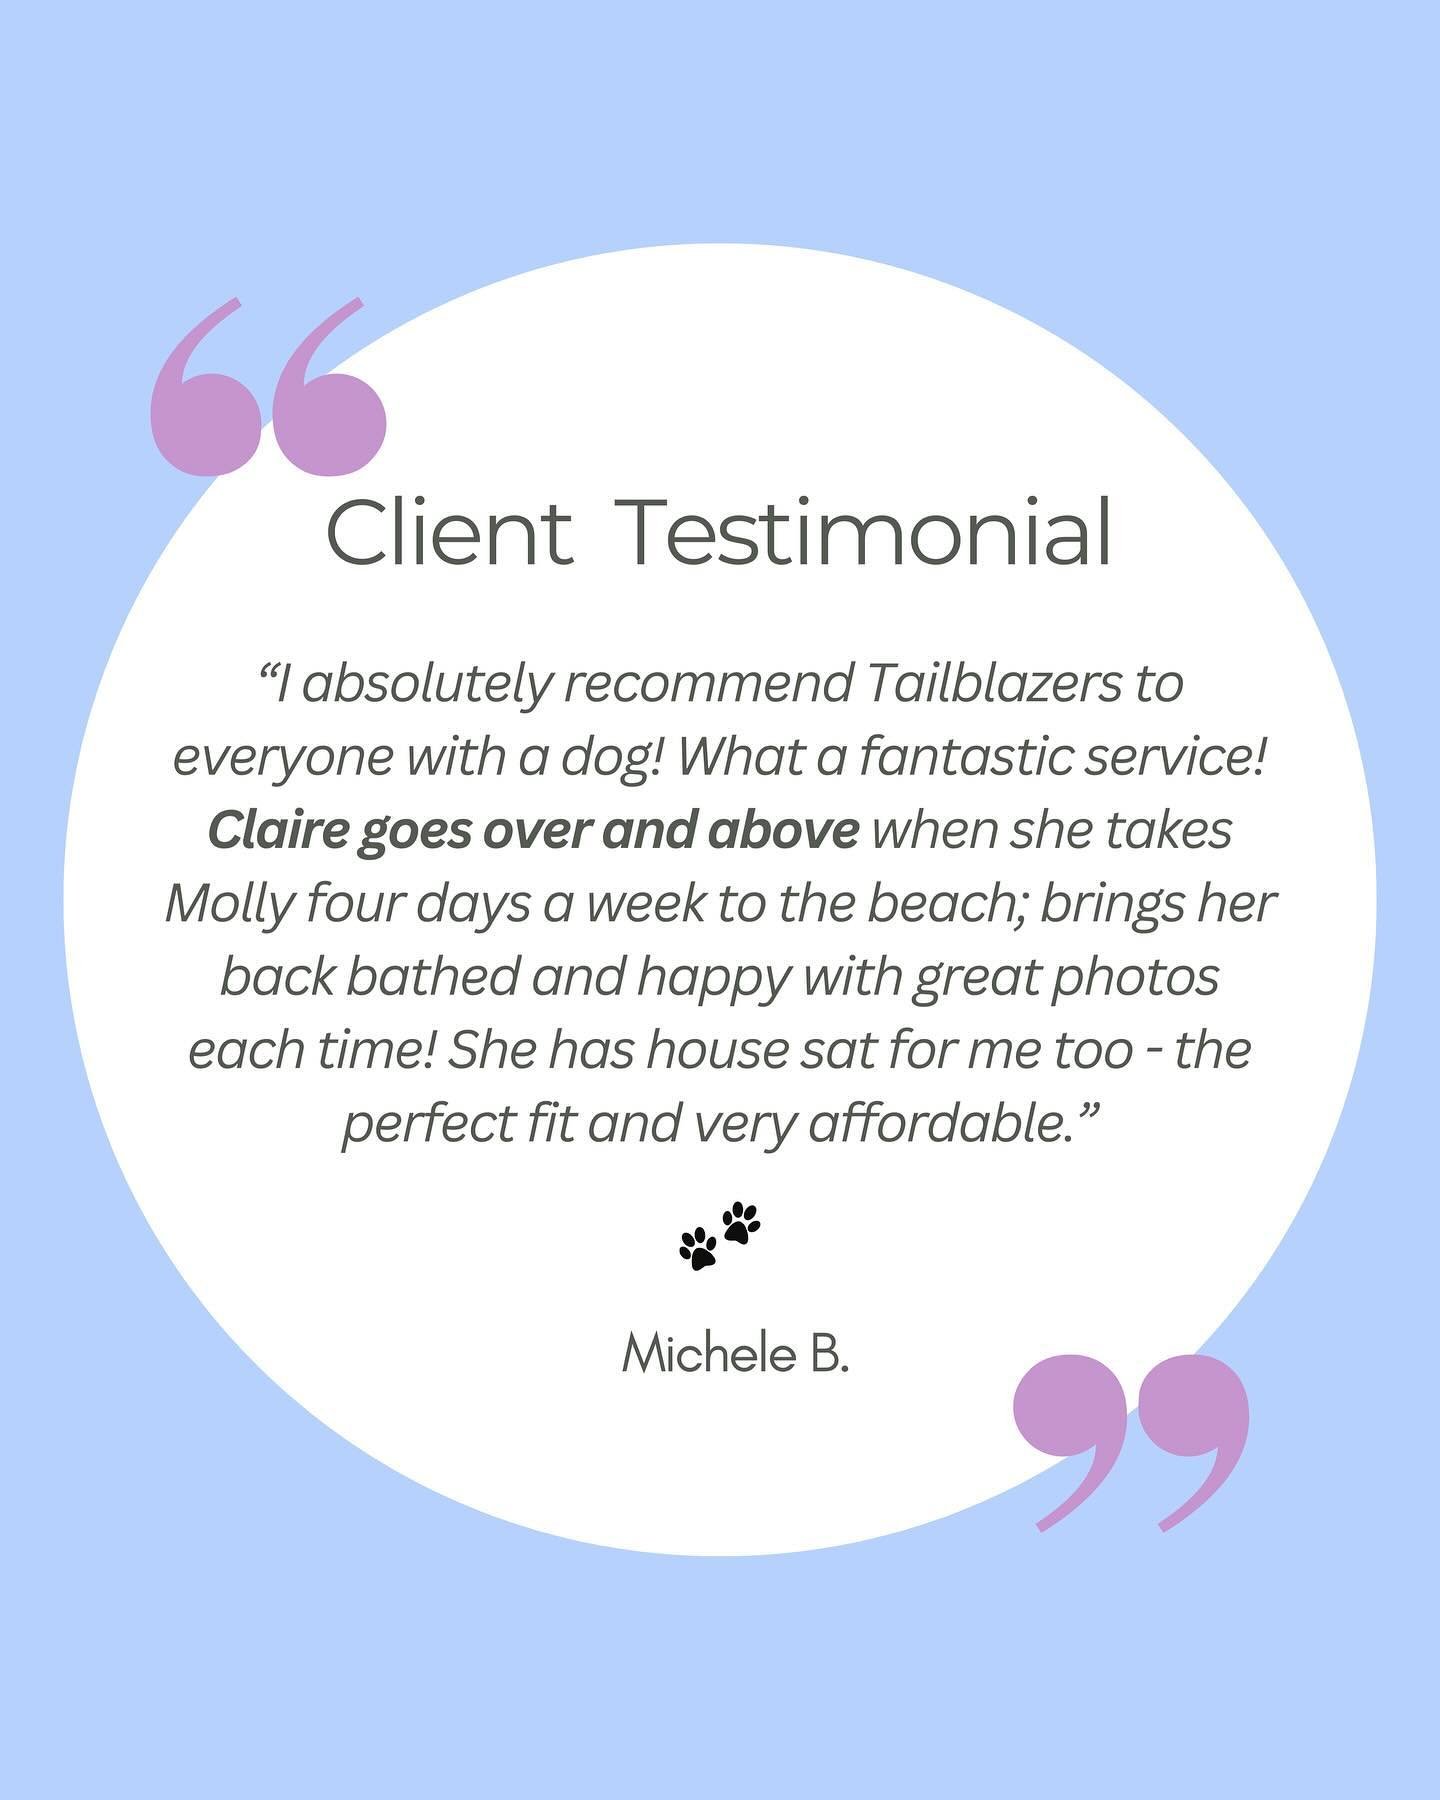 🗞️ Testimonial Tuesday 🗣️
&bull;
I had the absolute pleasure of walking Molly four times a week back in Australia. It was beach day everyday for Molly, with endless swimming in the sea and doing what miss Molly moo loves most - playing ball. 🎾
&bu